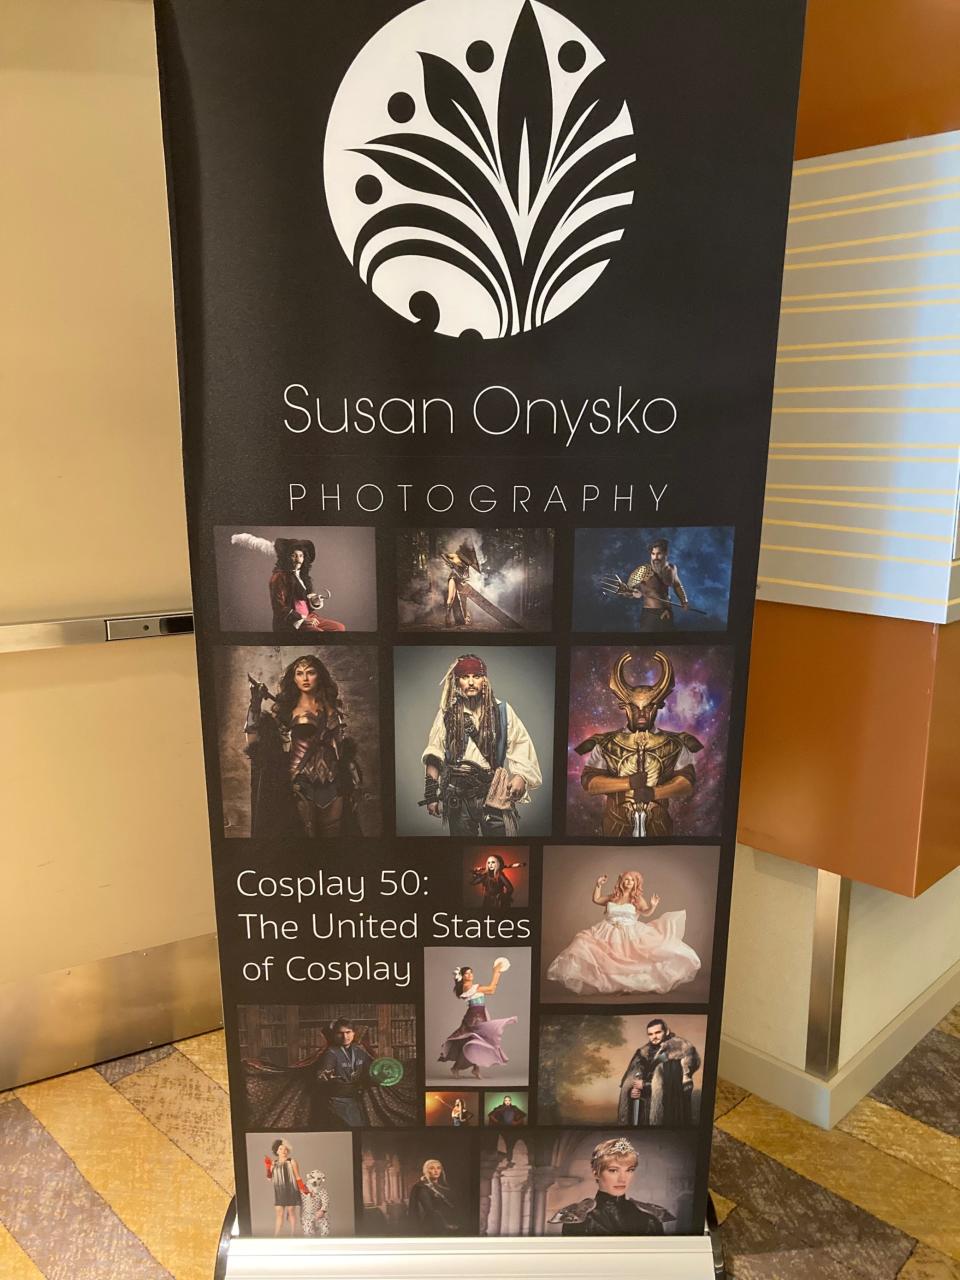 Susan Onysko Photography display showcasing her 'Cosplay 50: The United States of Cosplay."